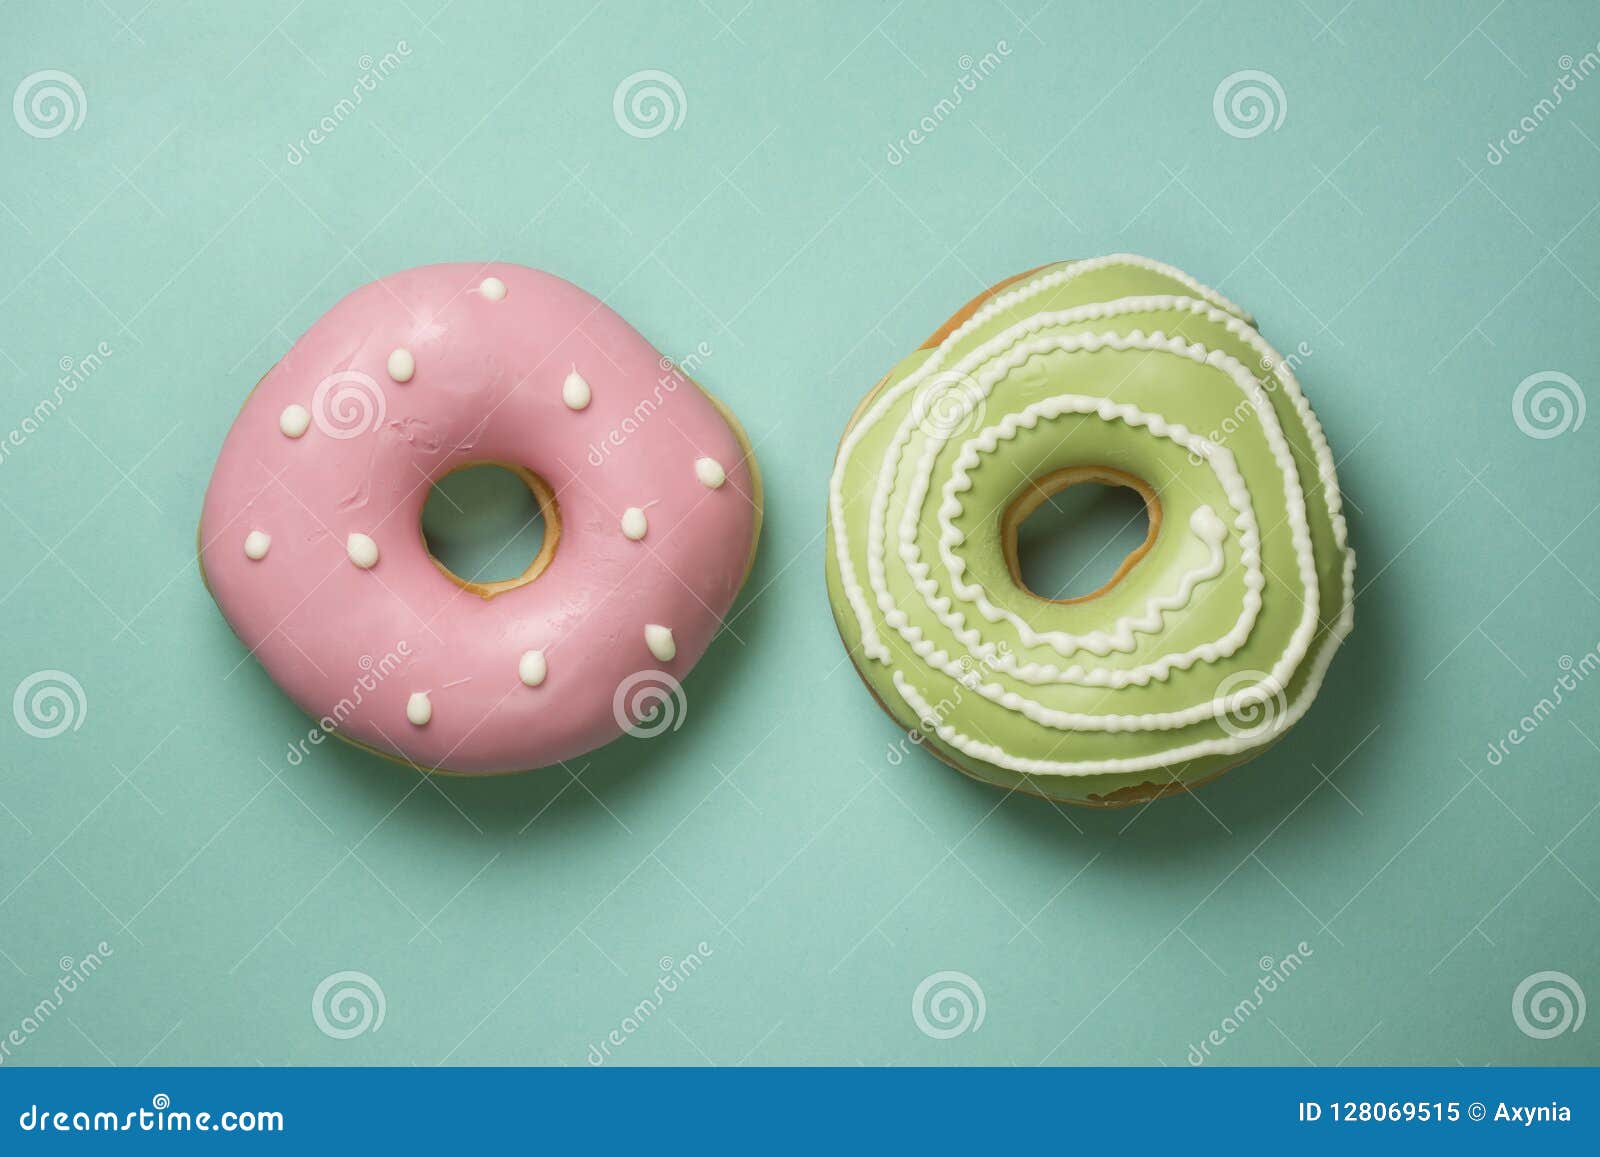 donuts on turquose background with green, pink icing and white sugar decorations